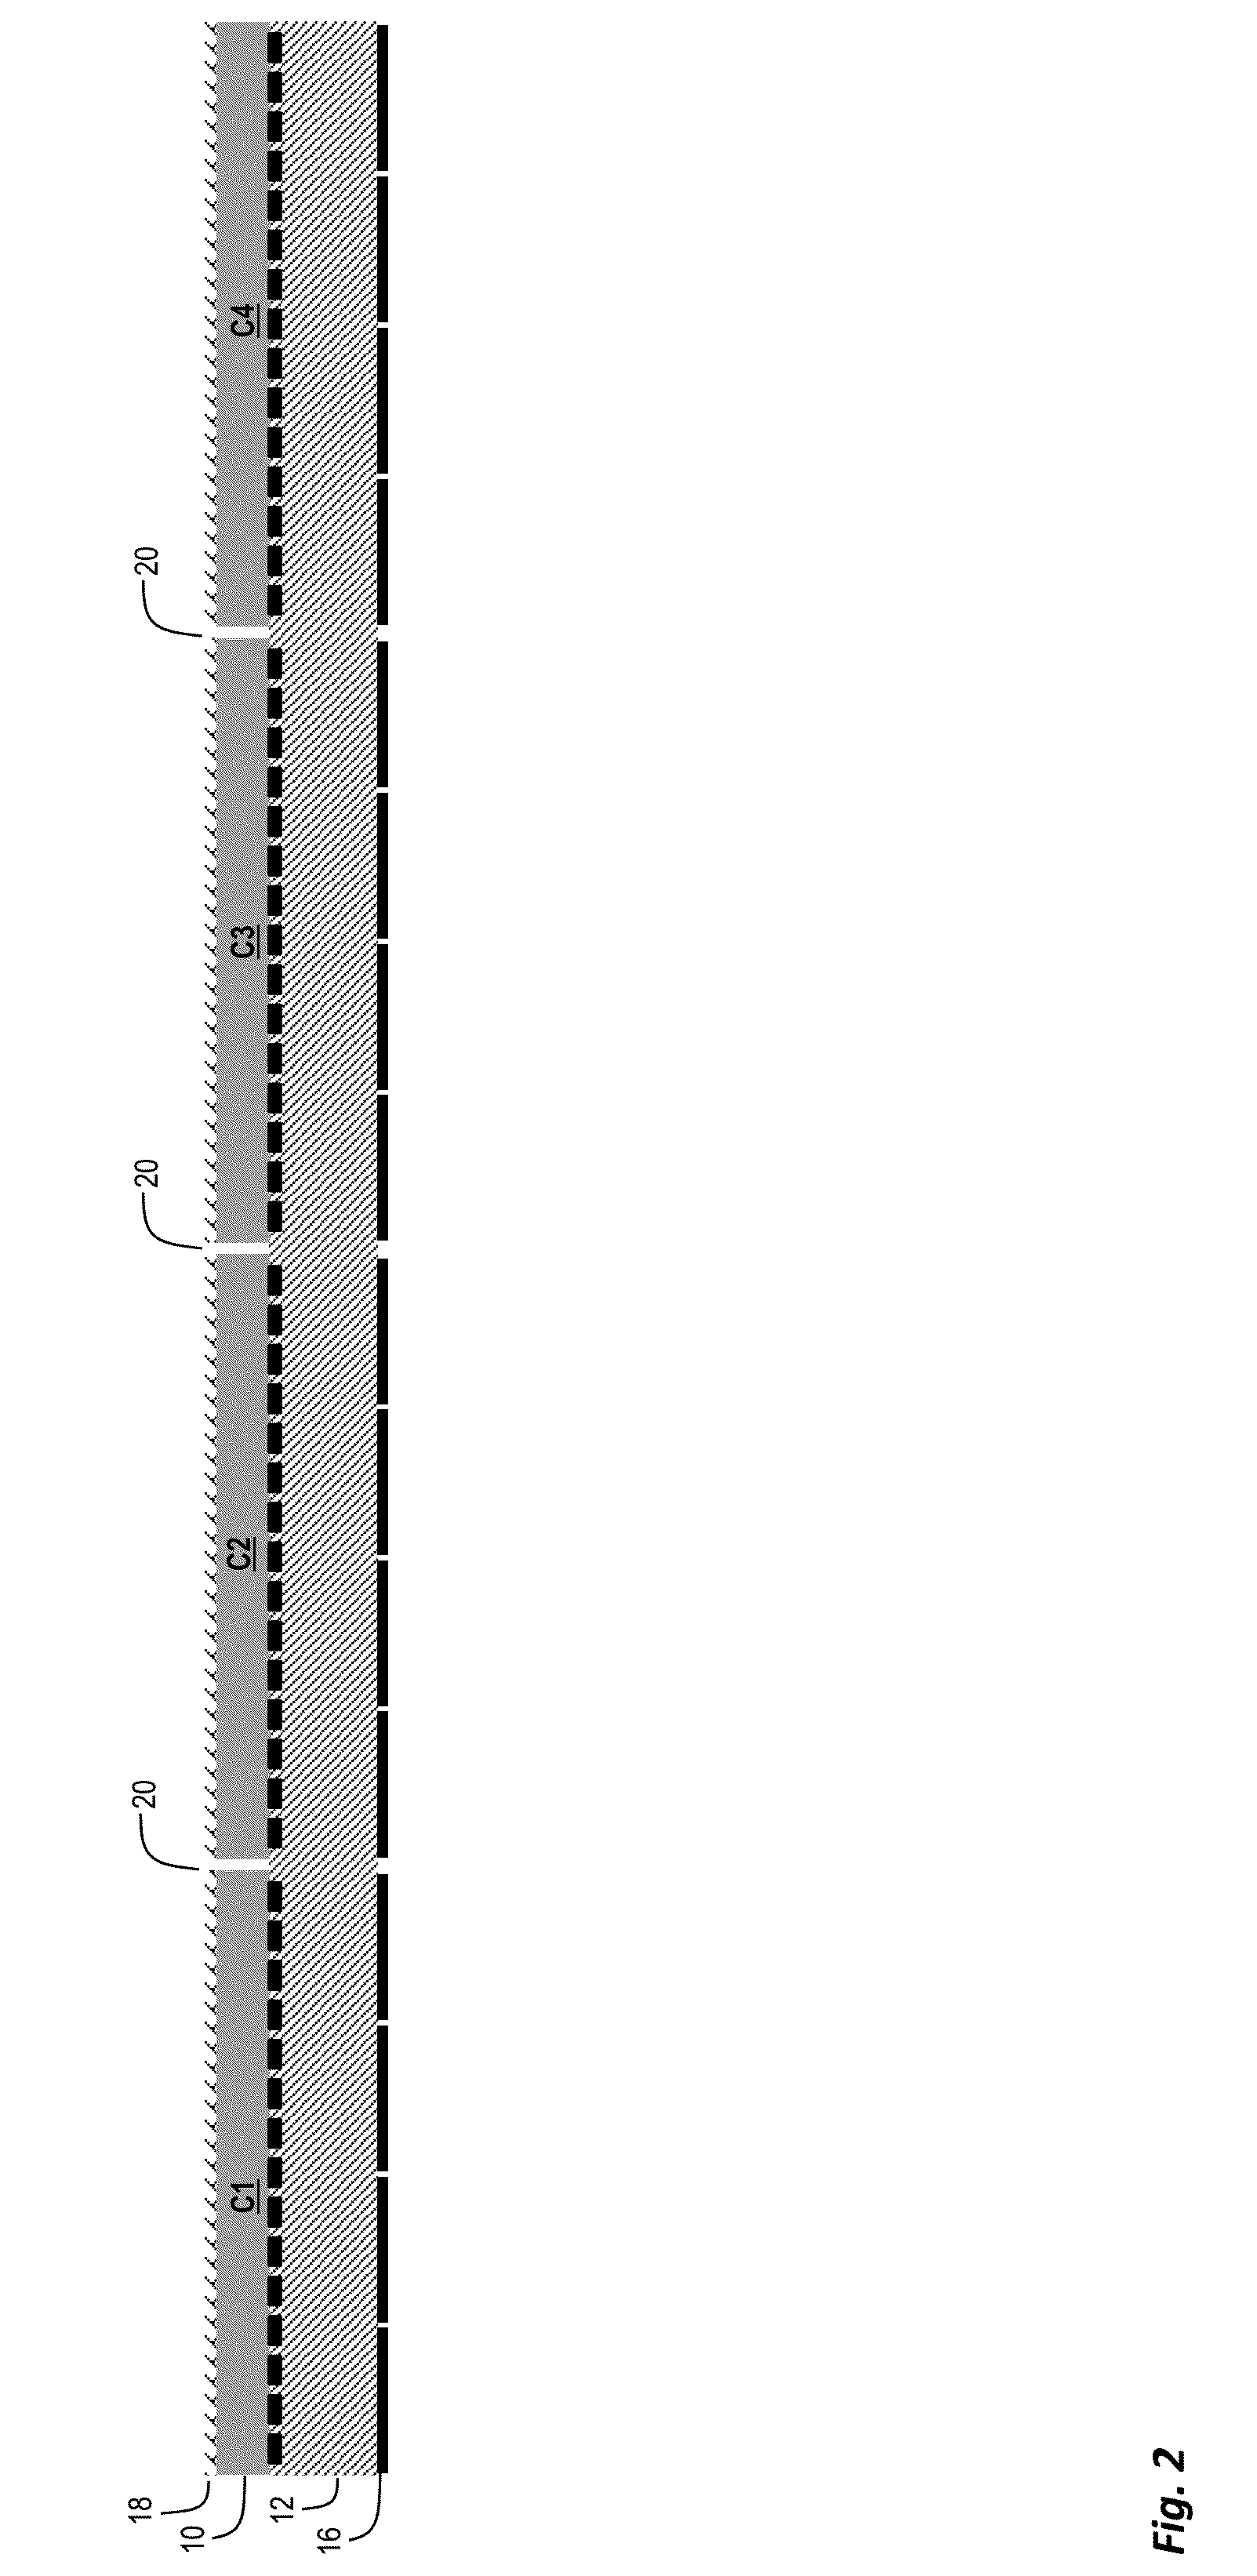 Photovoltaic monolithic solar module connection and fabrication methods